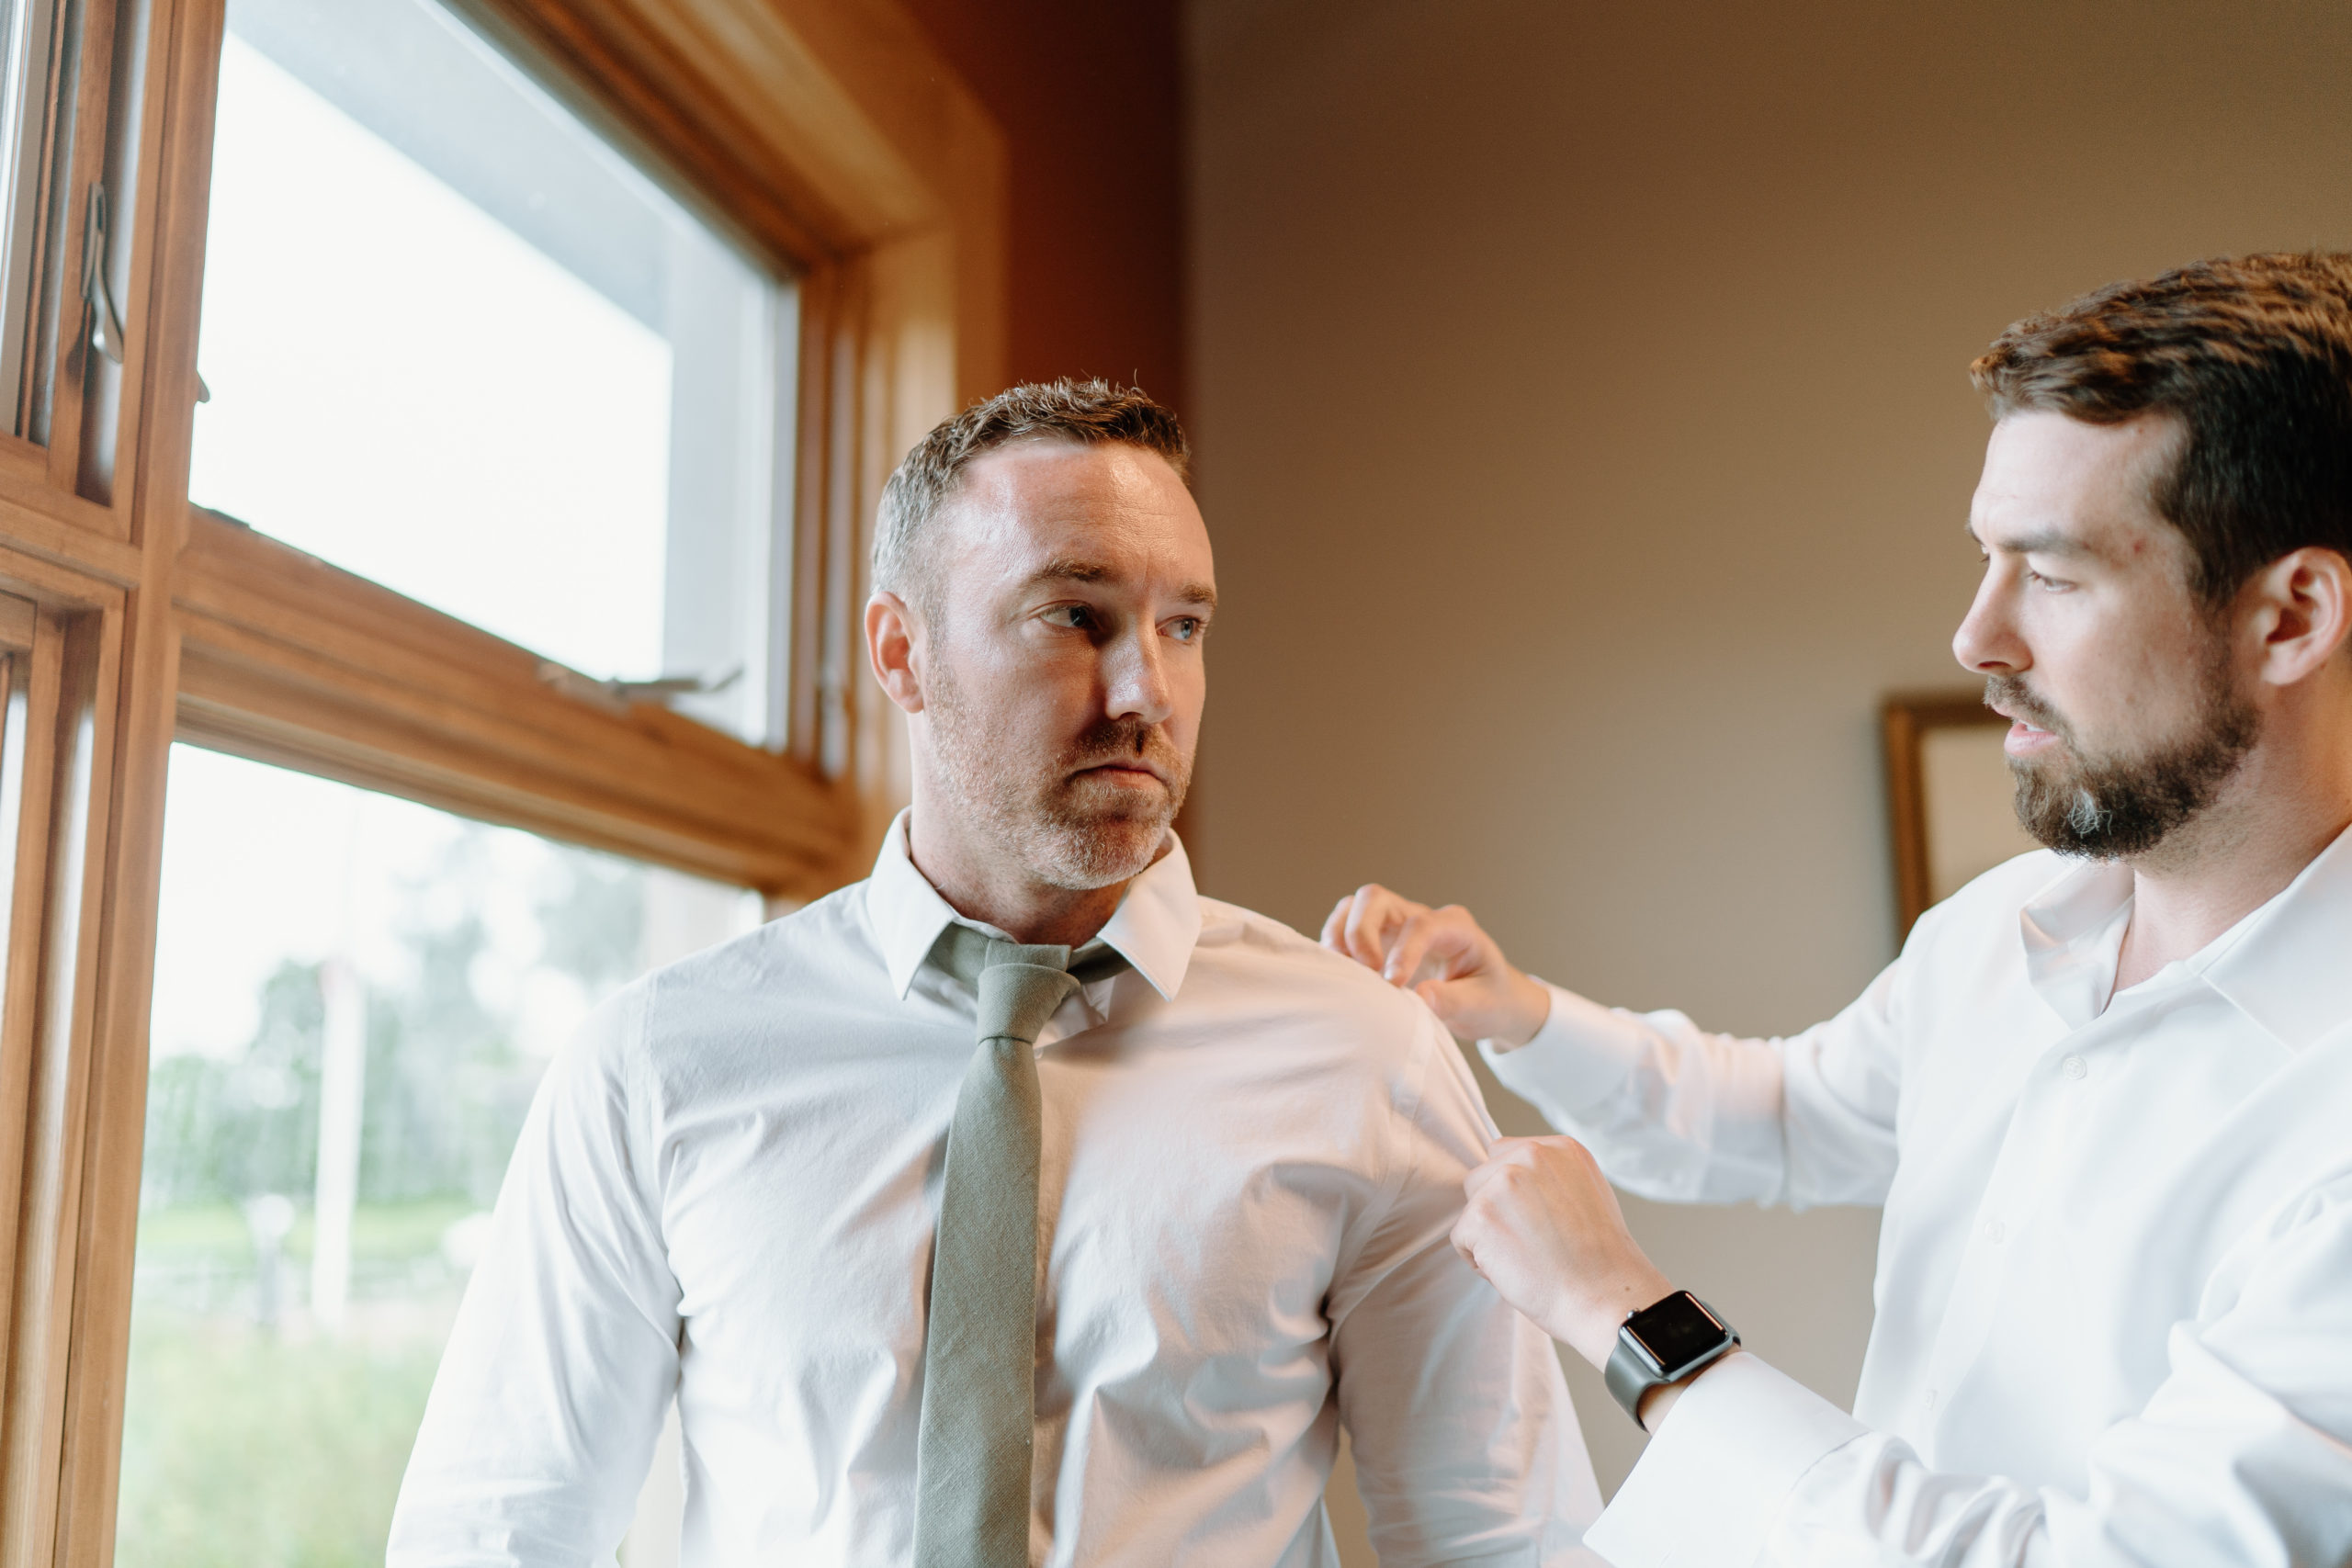 This is a groom getting dressed on his wedding day